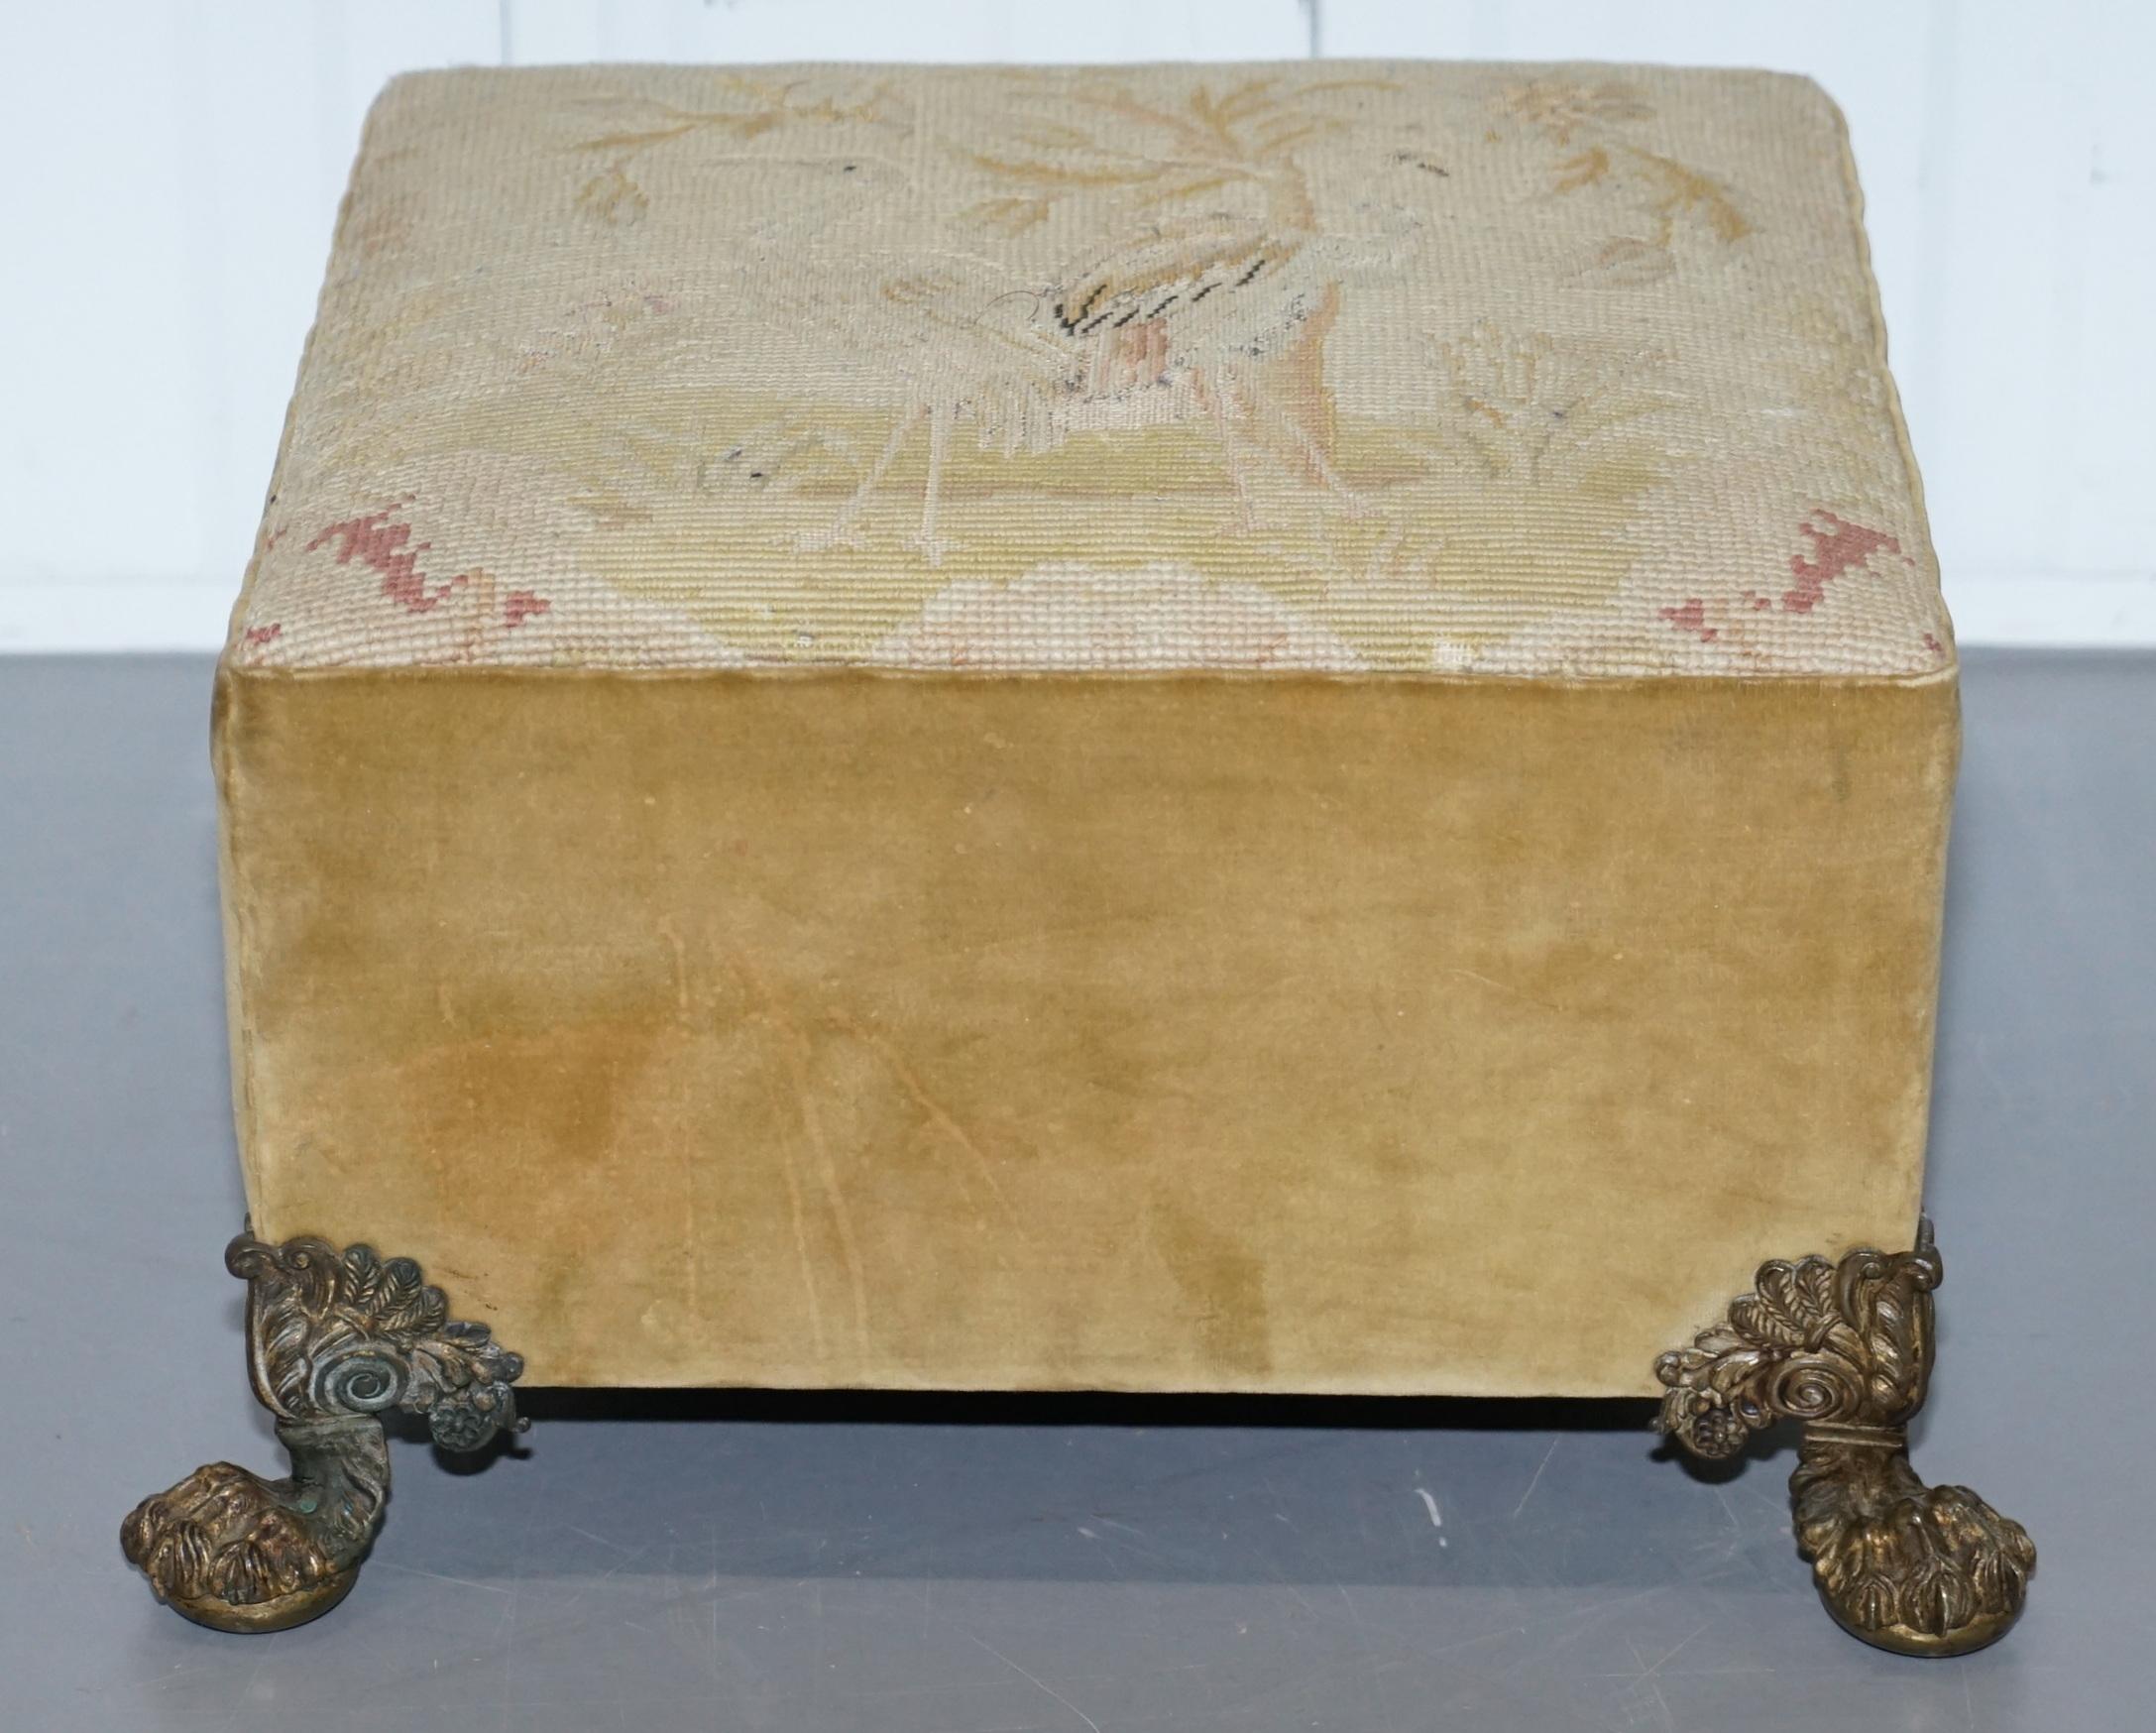 We are delighted to offer for sale this stunning hand embroidered Regency footstool with ornate bronze hairy paw feet from the Ian Thomas estate, dressmaker to Lady Diana

A very good looking and well made piece, the embroidery is stunning, it